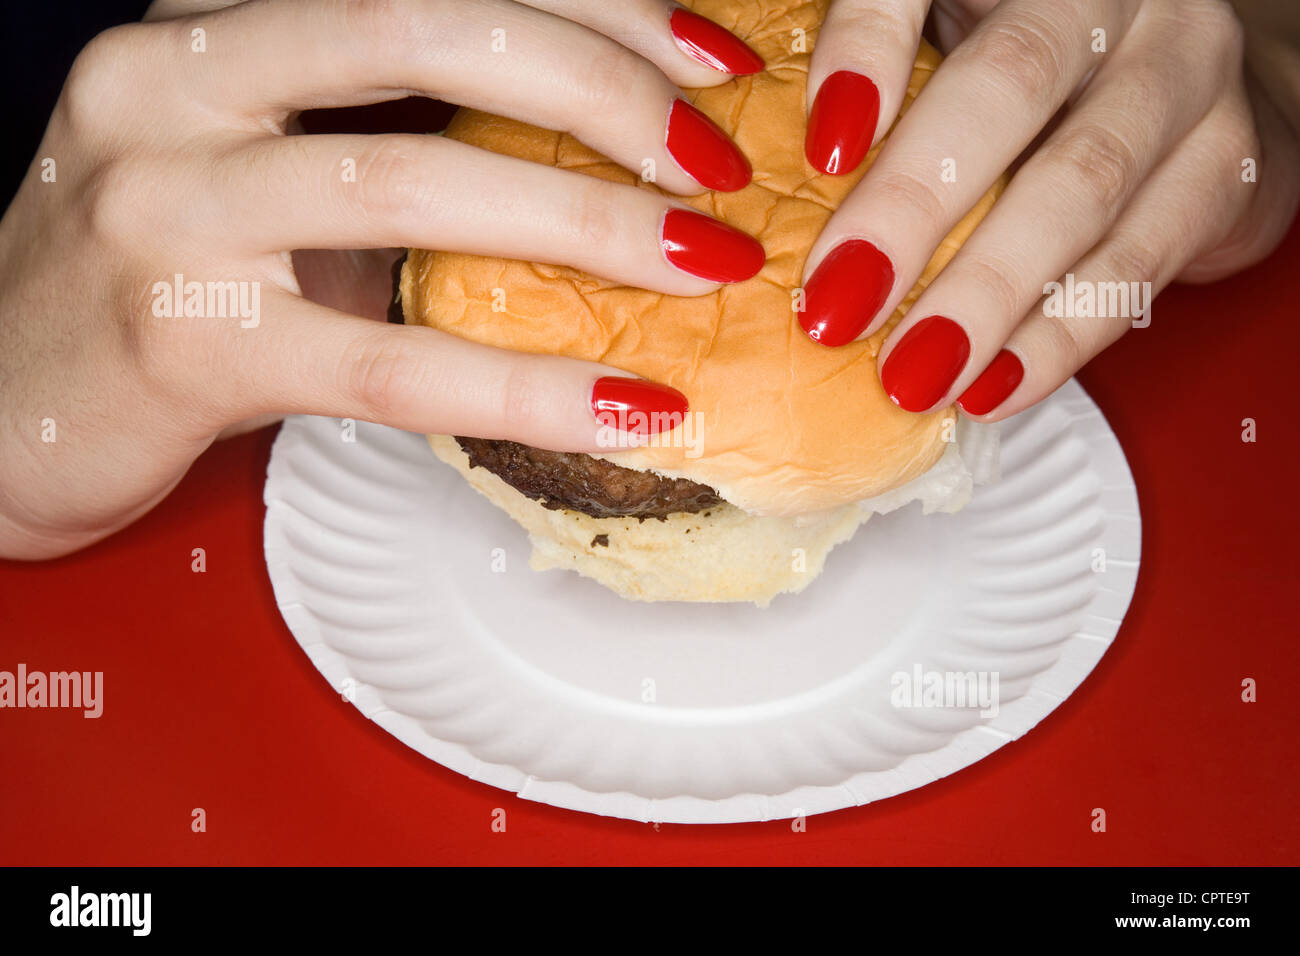 Woman with red fingernails holding burger Stock Photo